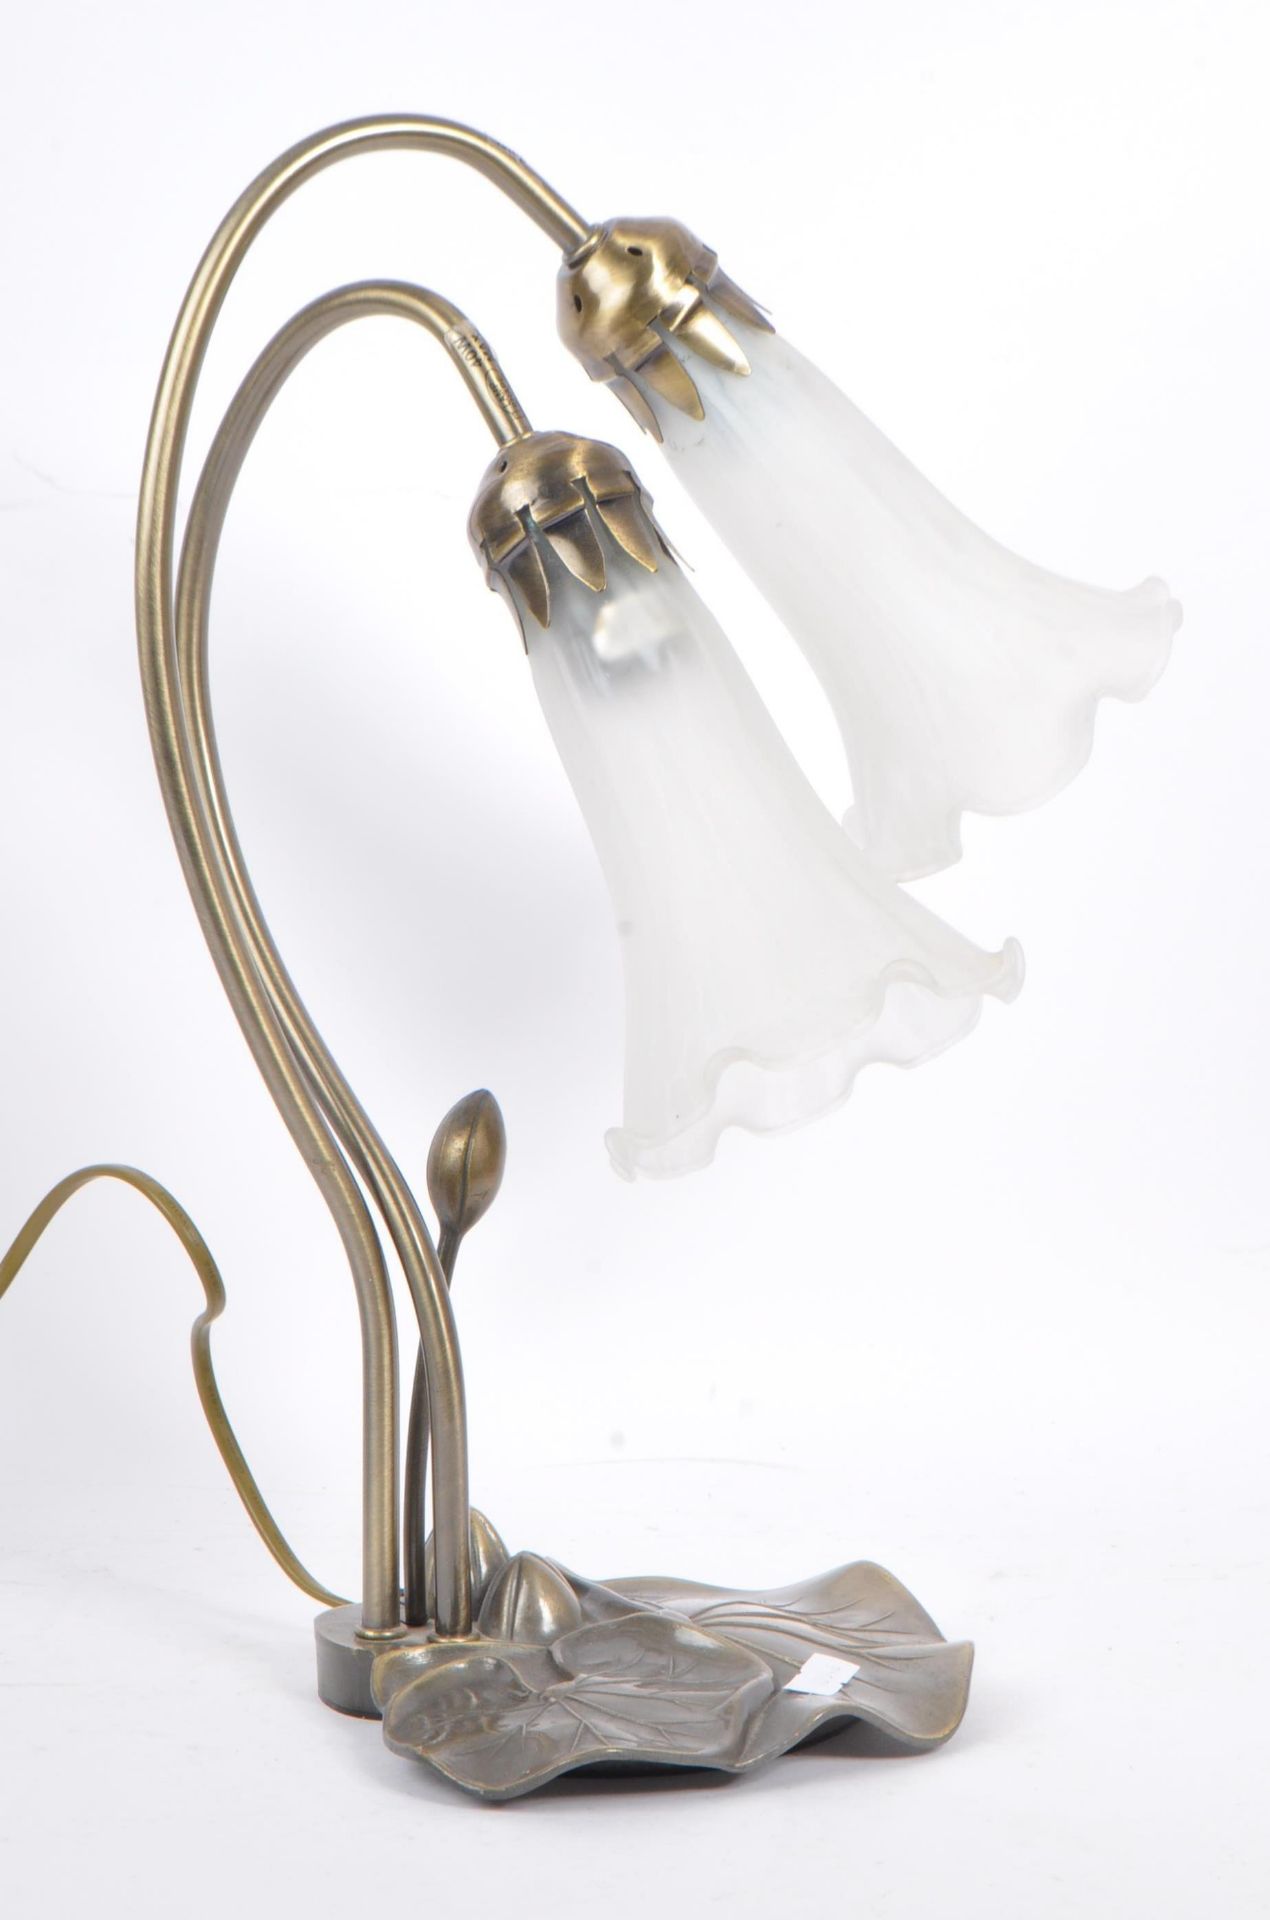 LATER 20TH CENTURY / ART NOUVEAU STYLE TABLE LAMP - Image 2 of 6